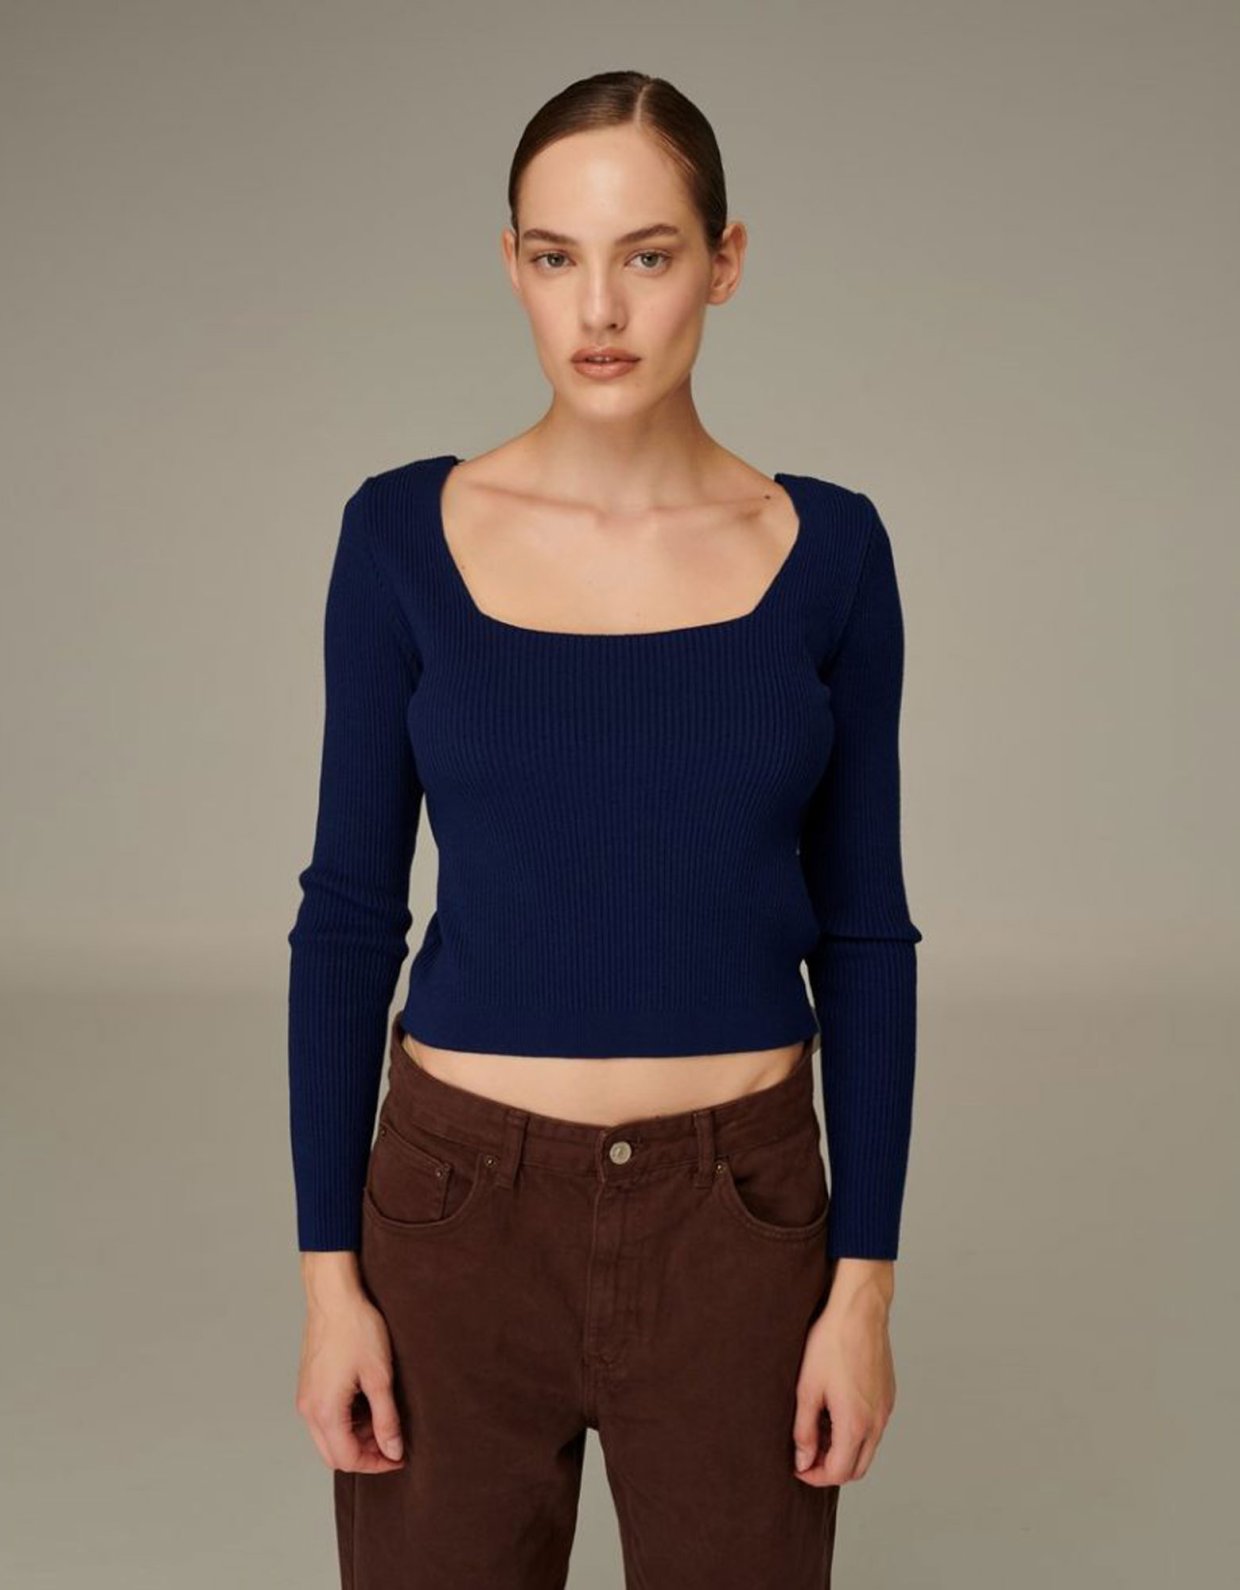 Combos Knitwear W-209 Square neck top navy blue